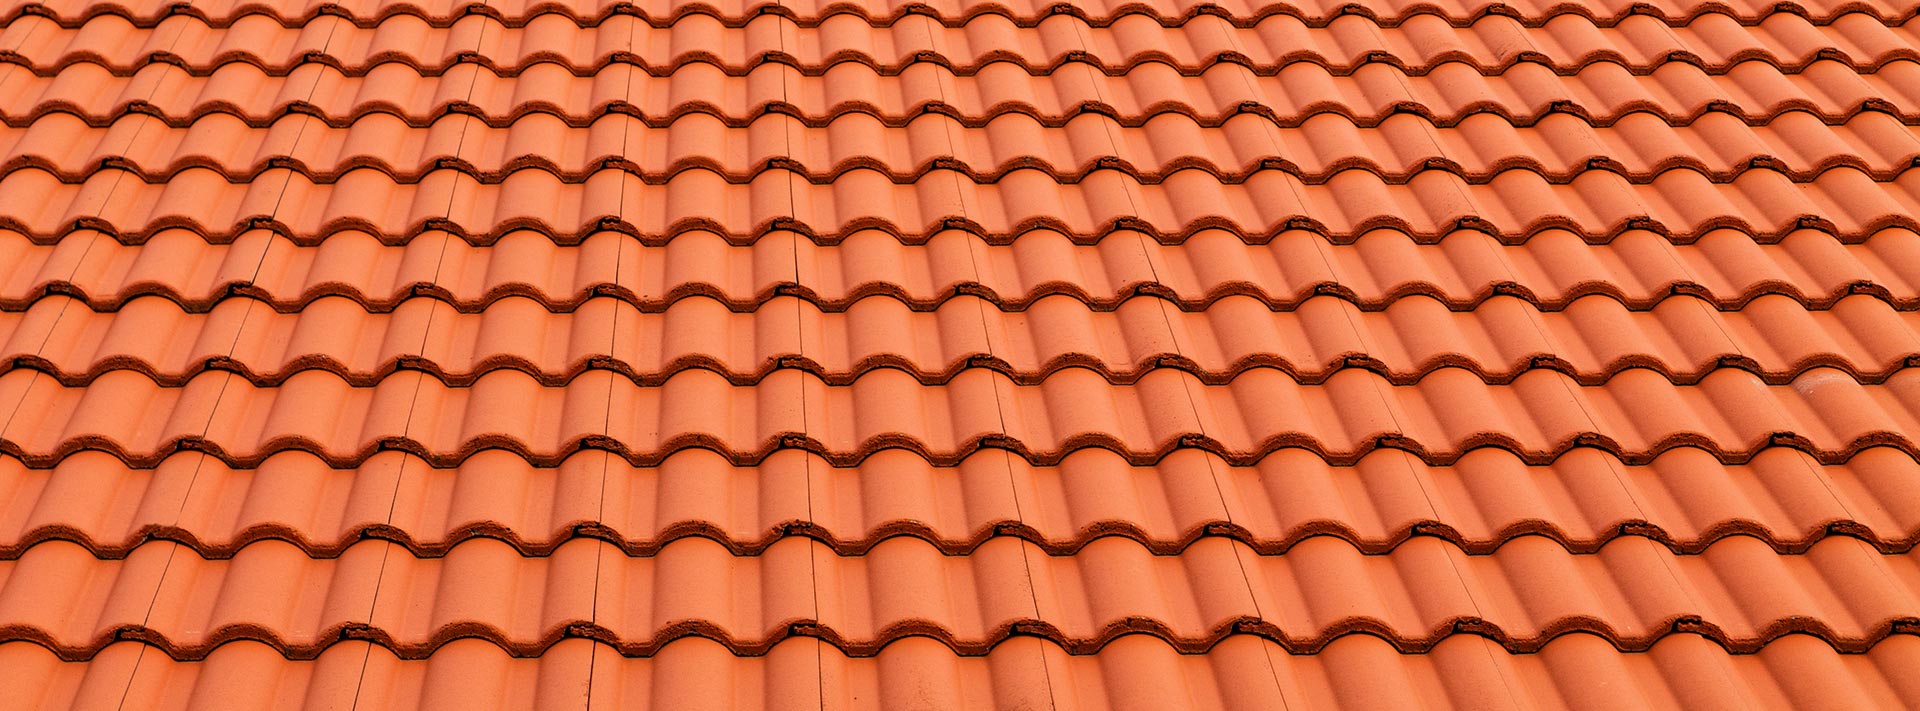 How To Keep Up Easily With Dealing With Your Roof